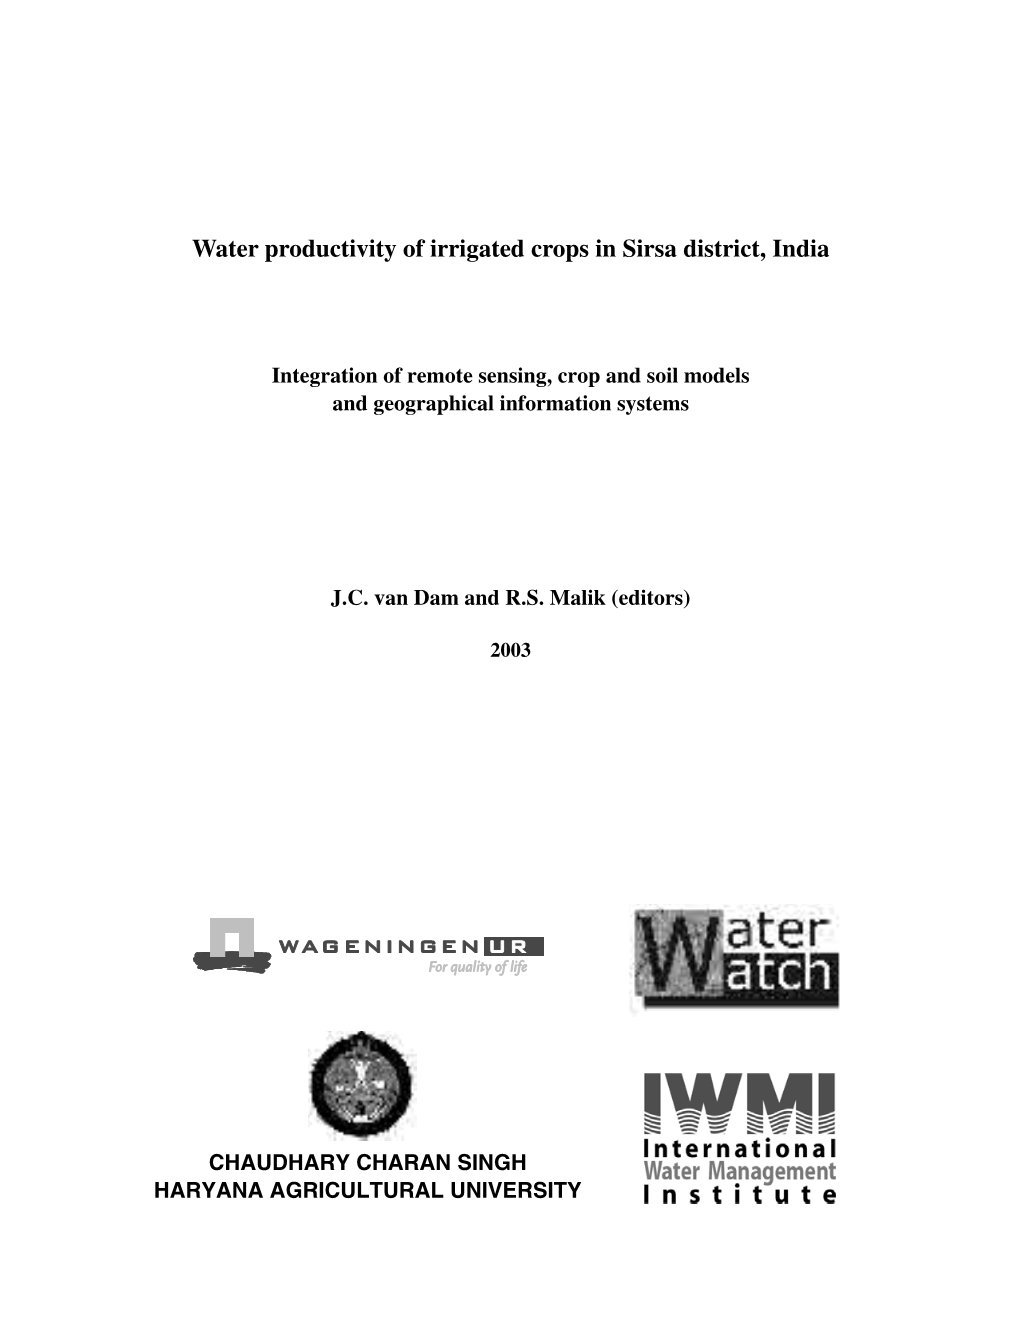 Water Productivity of Irrigated Crops in Sirsa District, India